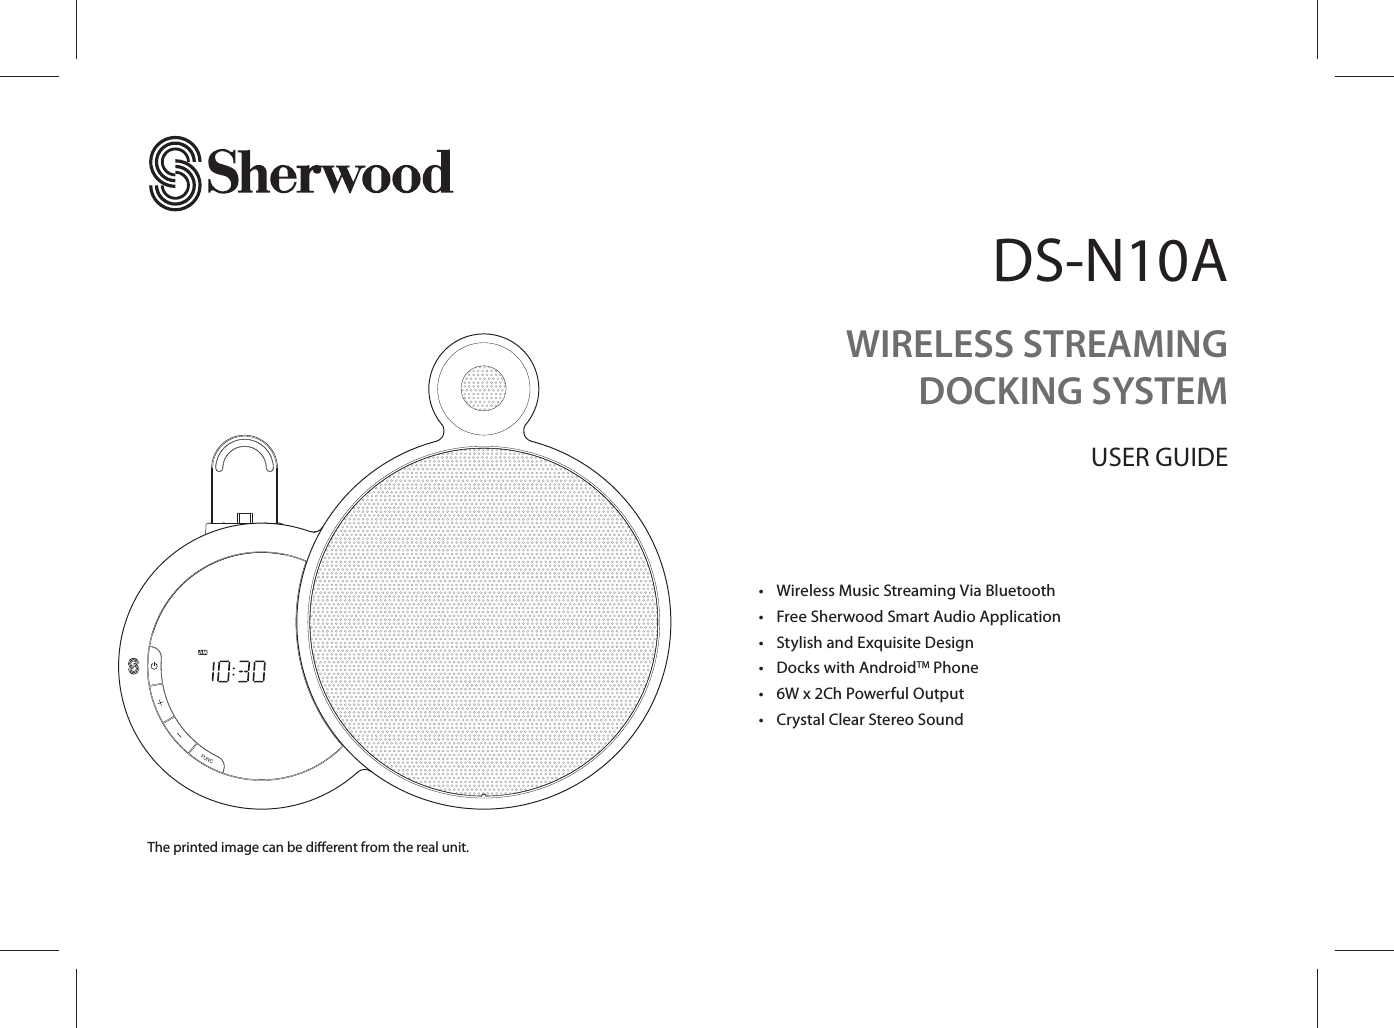 DS-N10A•  Wireless Music Streaming Via Bluetooth•  Free Sherwood Smart Audio Application•  Stylish and Exquisite Design•  Docks with AndroidTM Phone•  6W x 2Ch Powerful Output•  Crystal Clear Stereo SoundThe printed image can be di erent from the real unit.WIRELESS STREAMING DOCKING SYSTEMUSER GUIDE